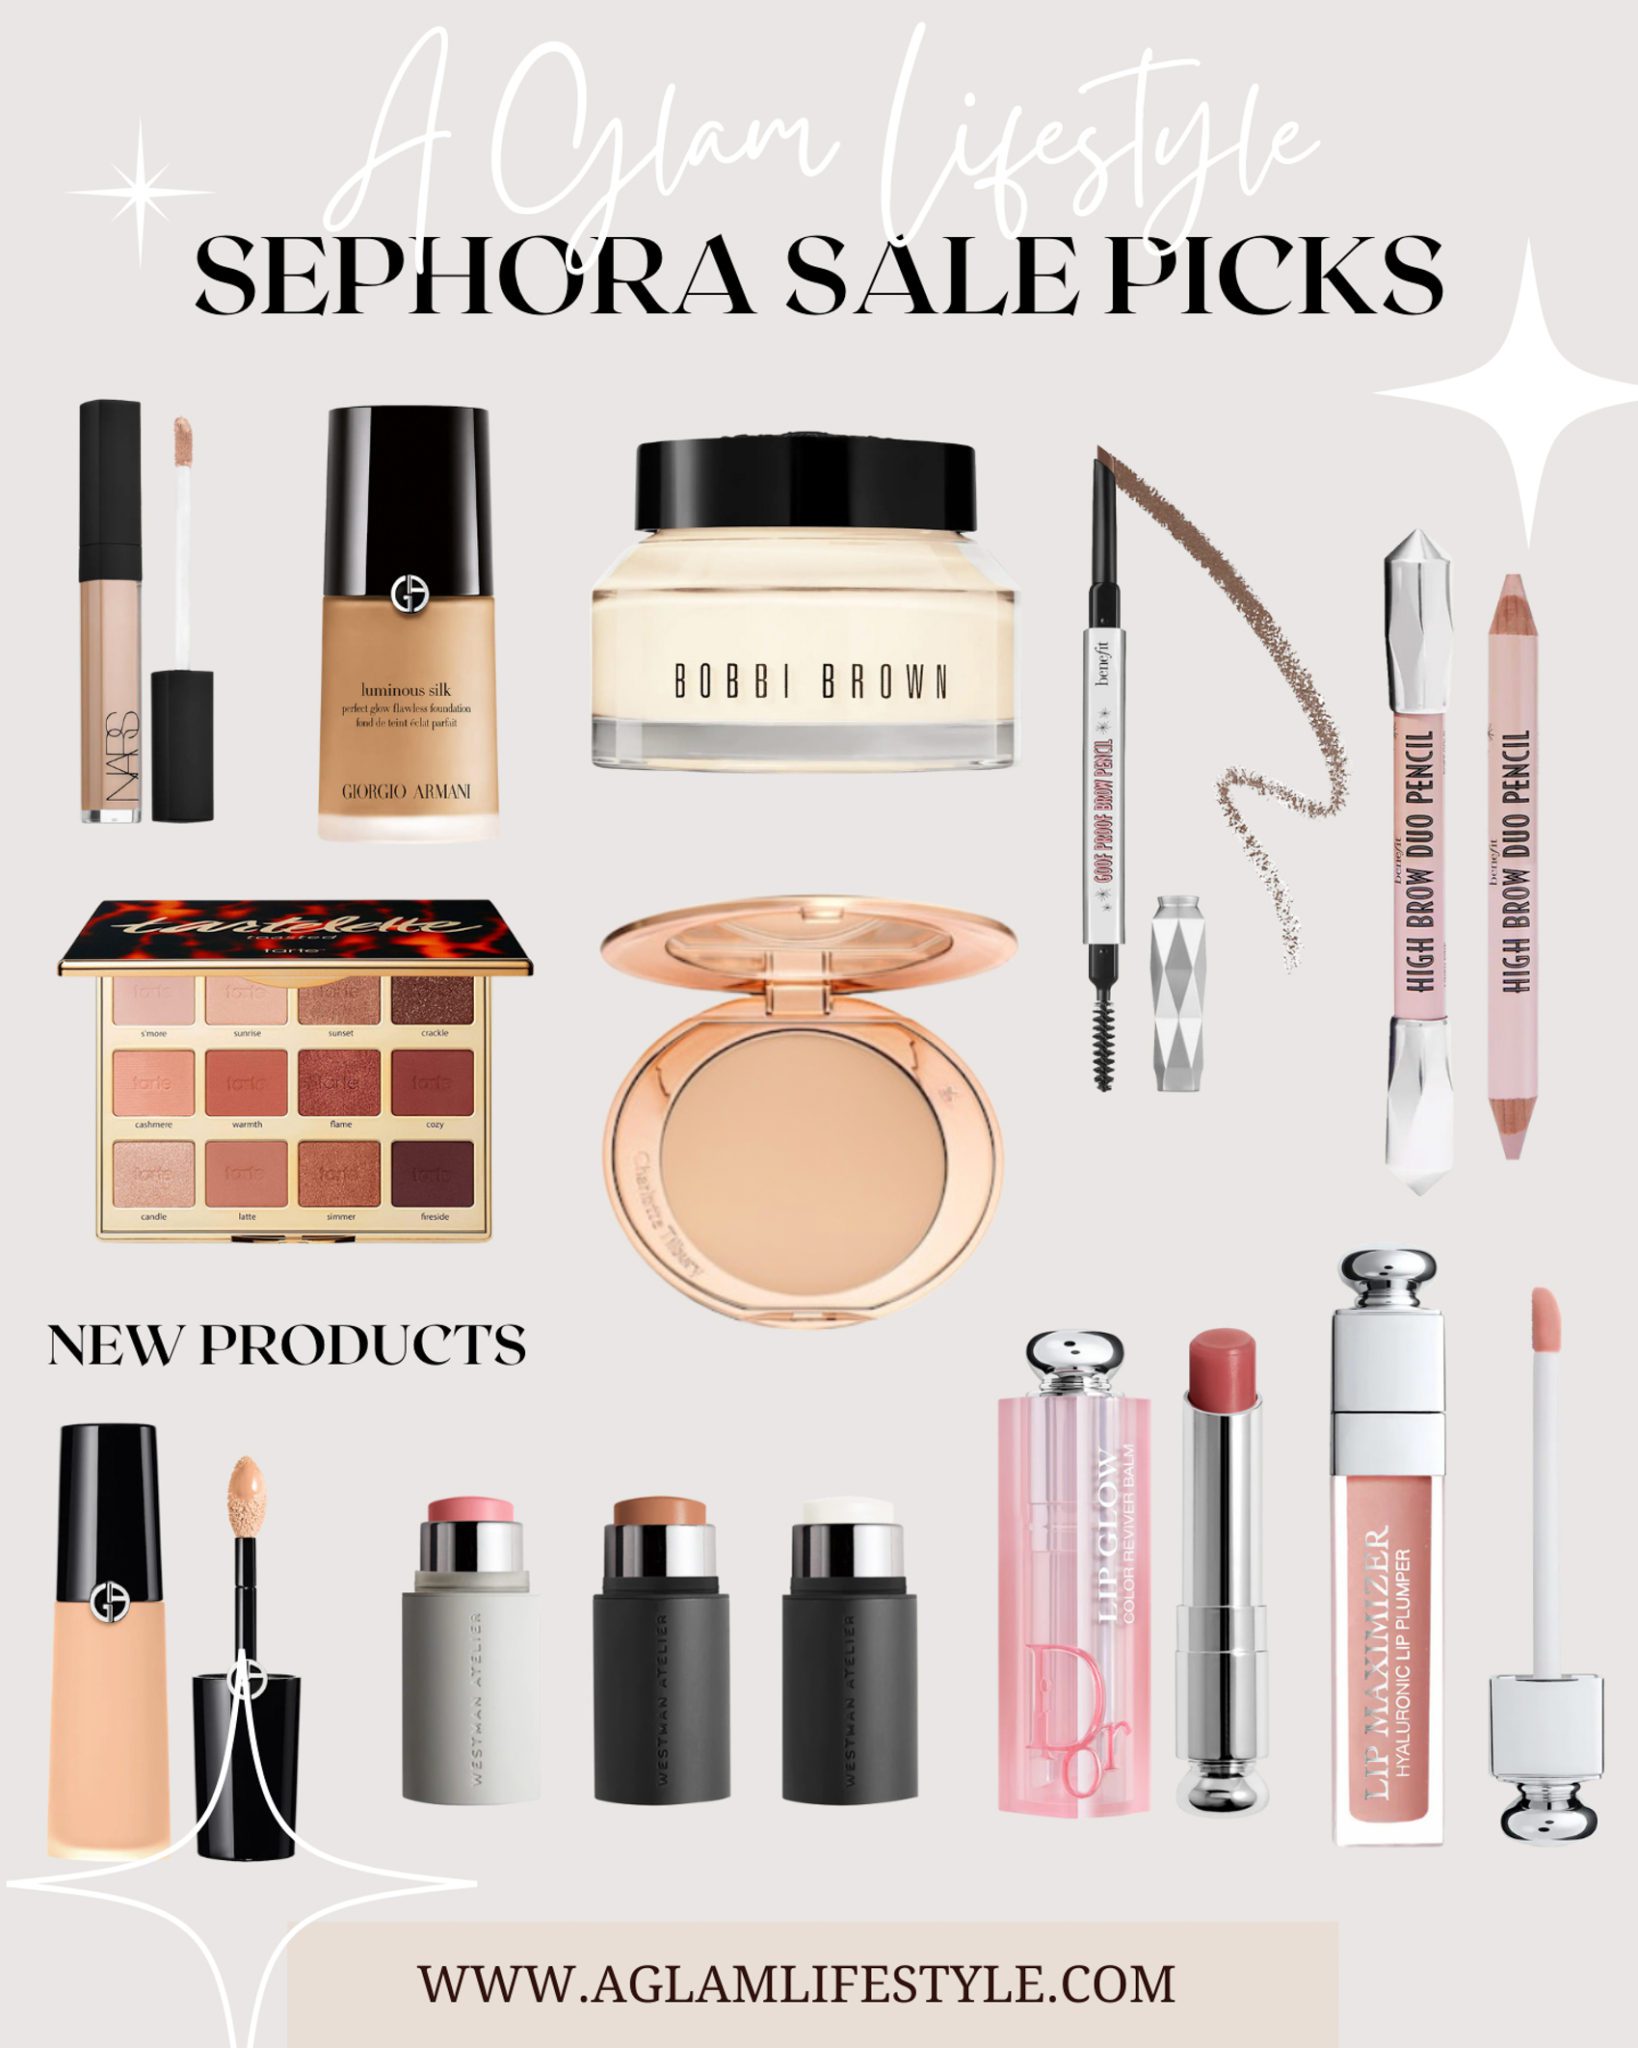 Sephora Spring Savings Event: 12 Makeup Deals to Add to Your Cart